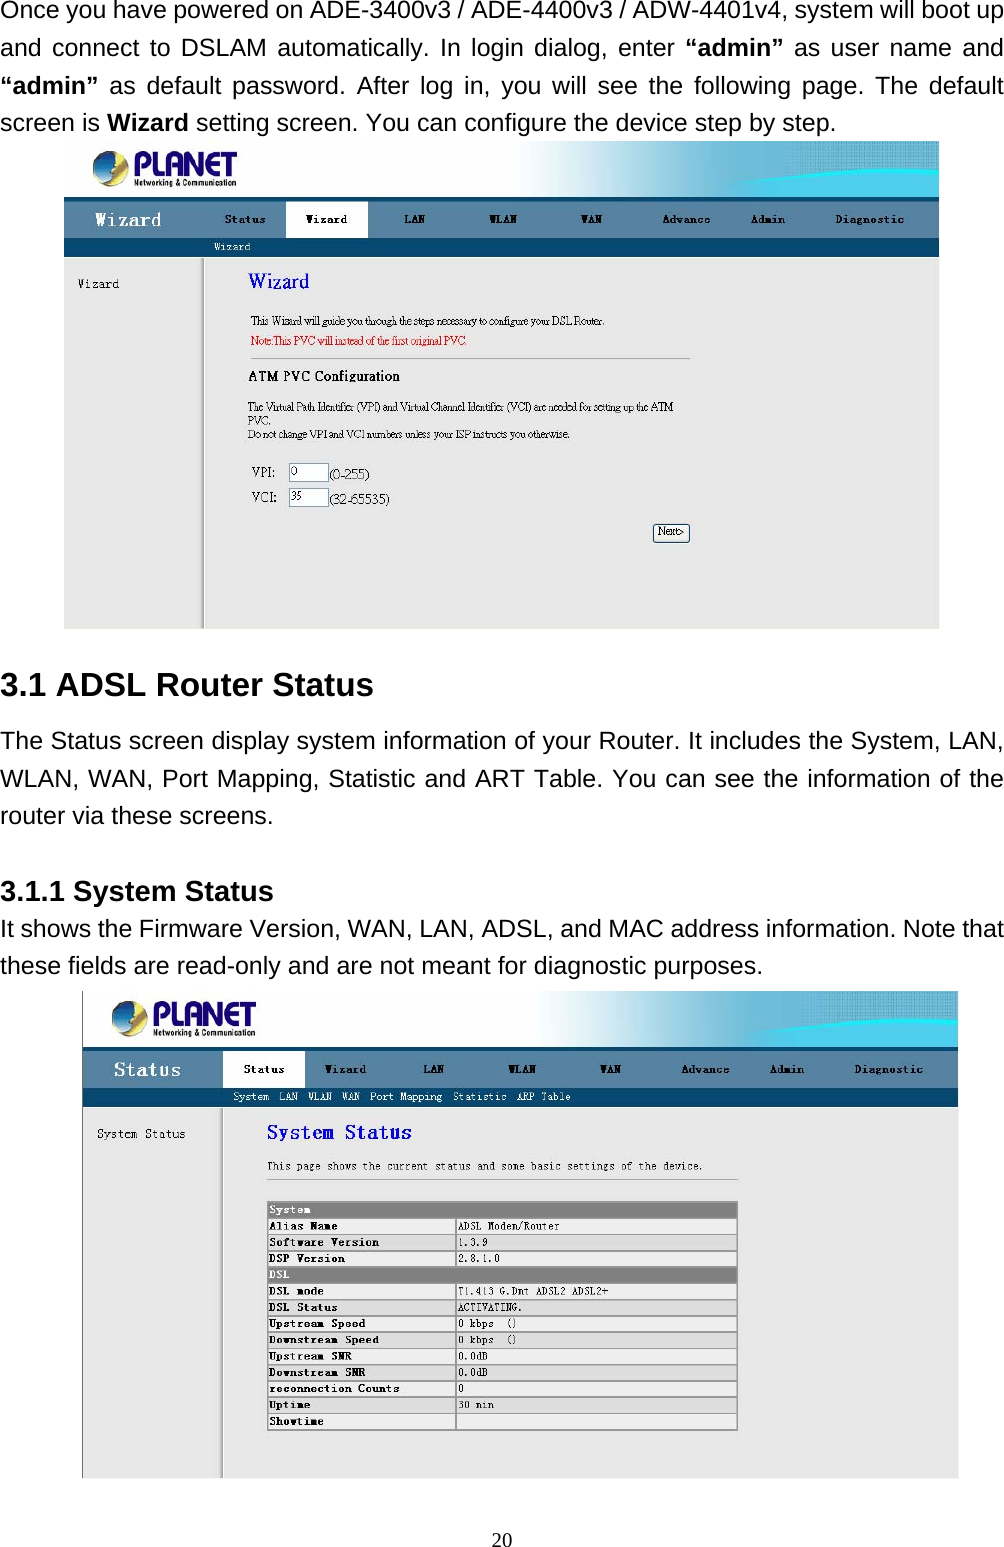 Once you have powered on ADE-3400v3 / ADE-4400v3 / ADW-4401v4, system will boot up and connect to DSLAM automatically. In login dialog, enter “admin” as user name and “admin” as default password. After log in, you will see the following page. The default screen is Wizard setting screen. You can configure the device step by step.  3.1 ADSL Router Status The Status screen display system information of your Router. It includes the System, LAN, WLAN, WAN, Port Mapping, Statistic and ART Table. You can see the information of the router via these screens. 3.1.1 System Status It shows the Firmware Version, WAN, LAN, ADSL, and MAC address information. Note that these fields are read-only and are not meant for diagnostic purposes.                                                                20